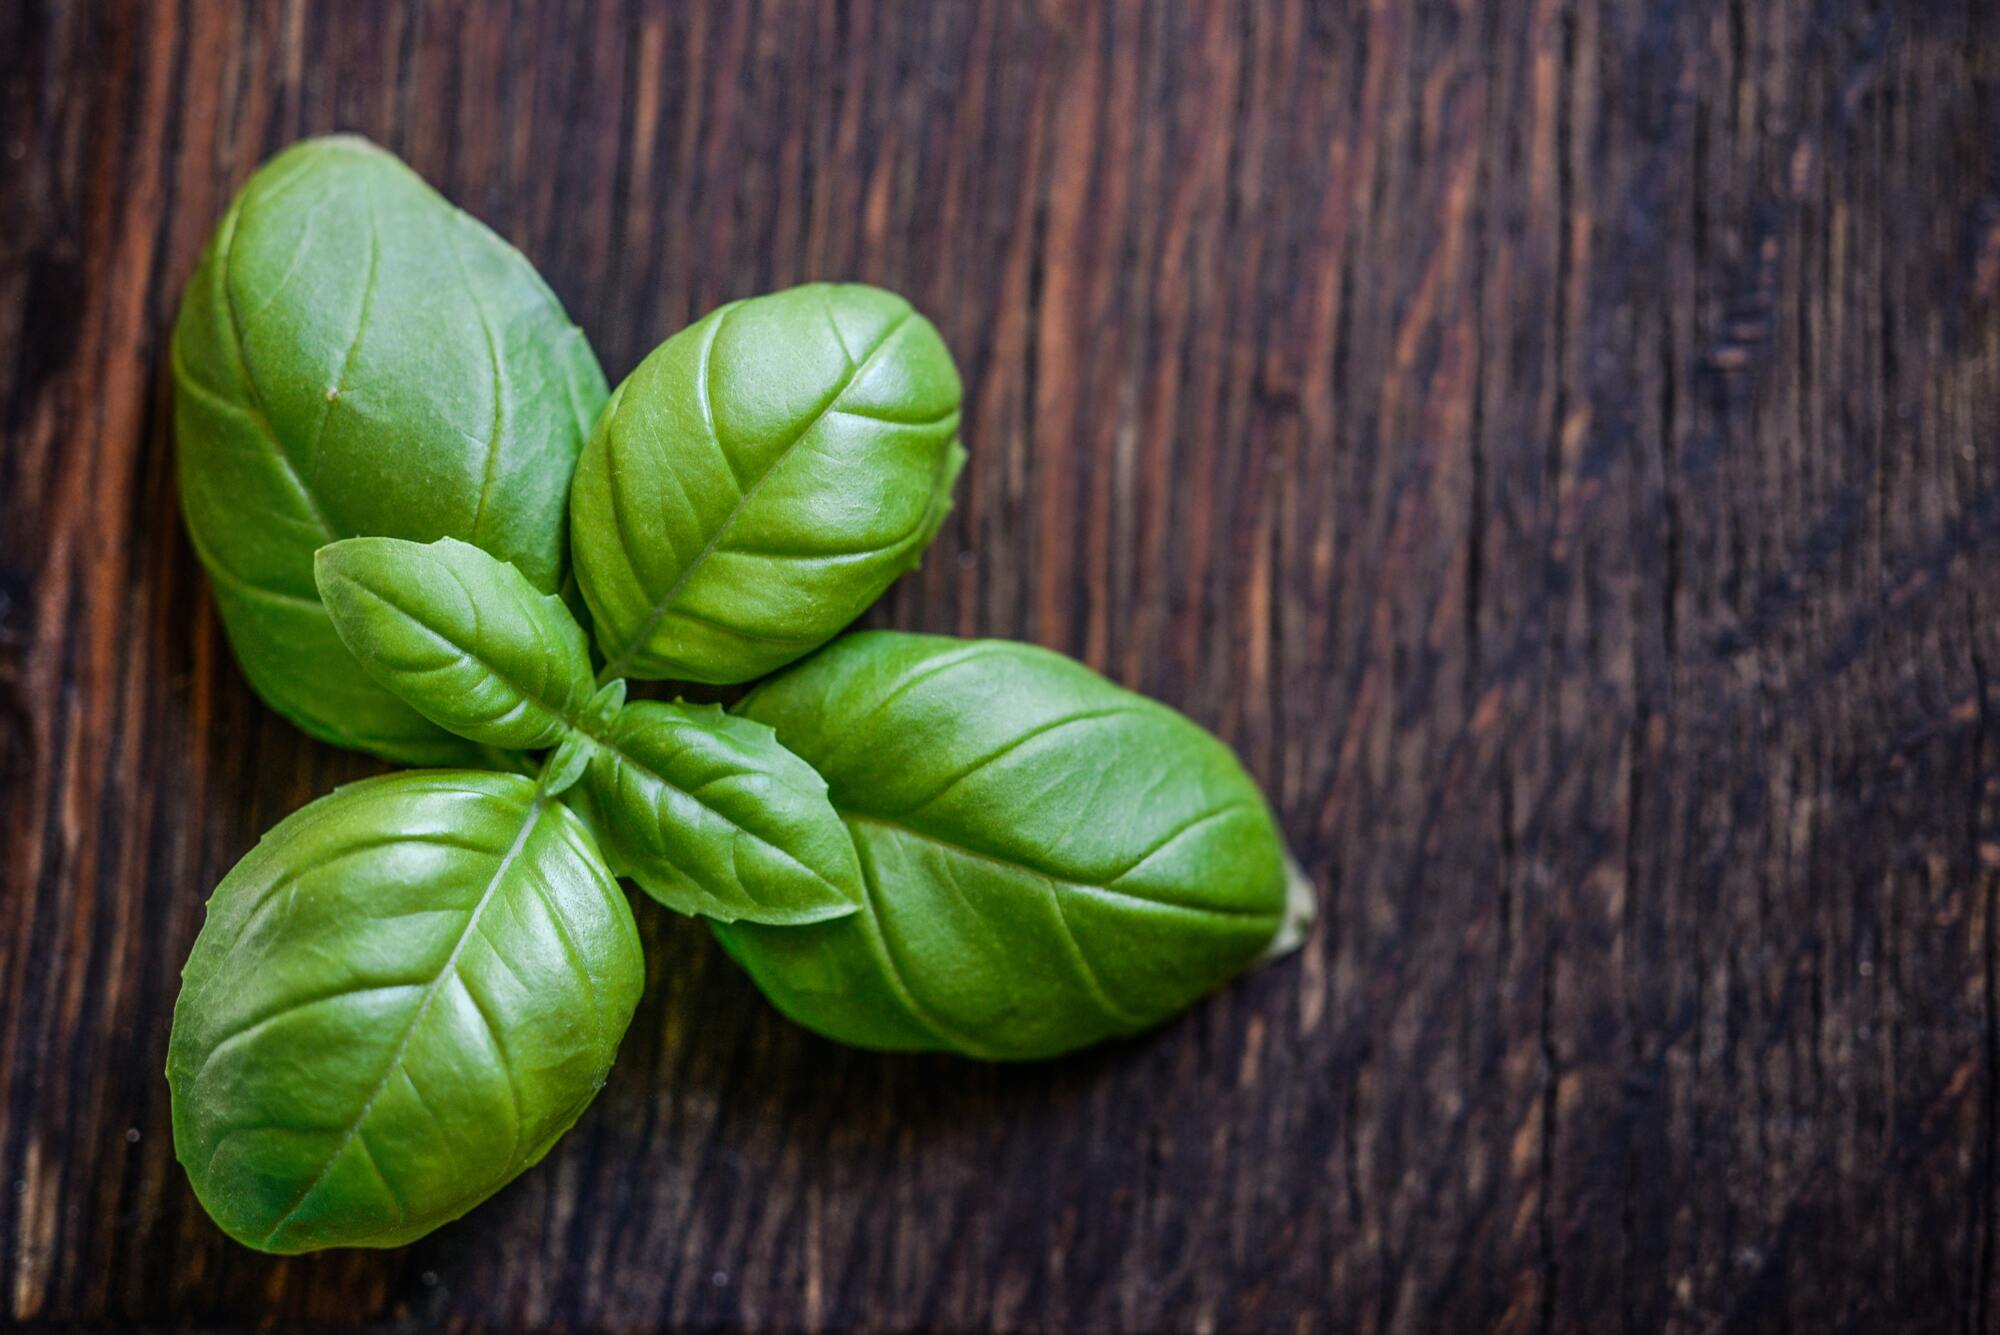 How to properly freeze green basil